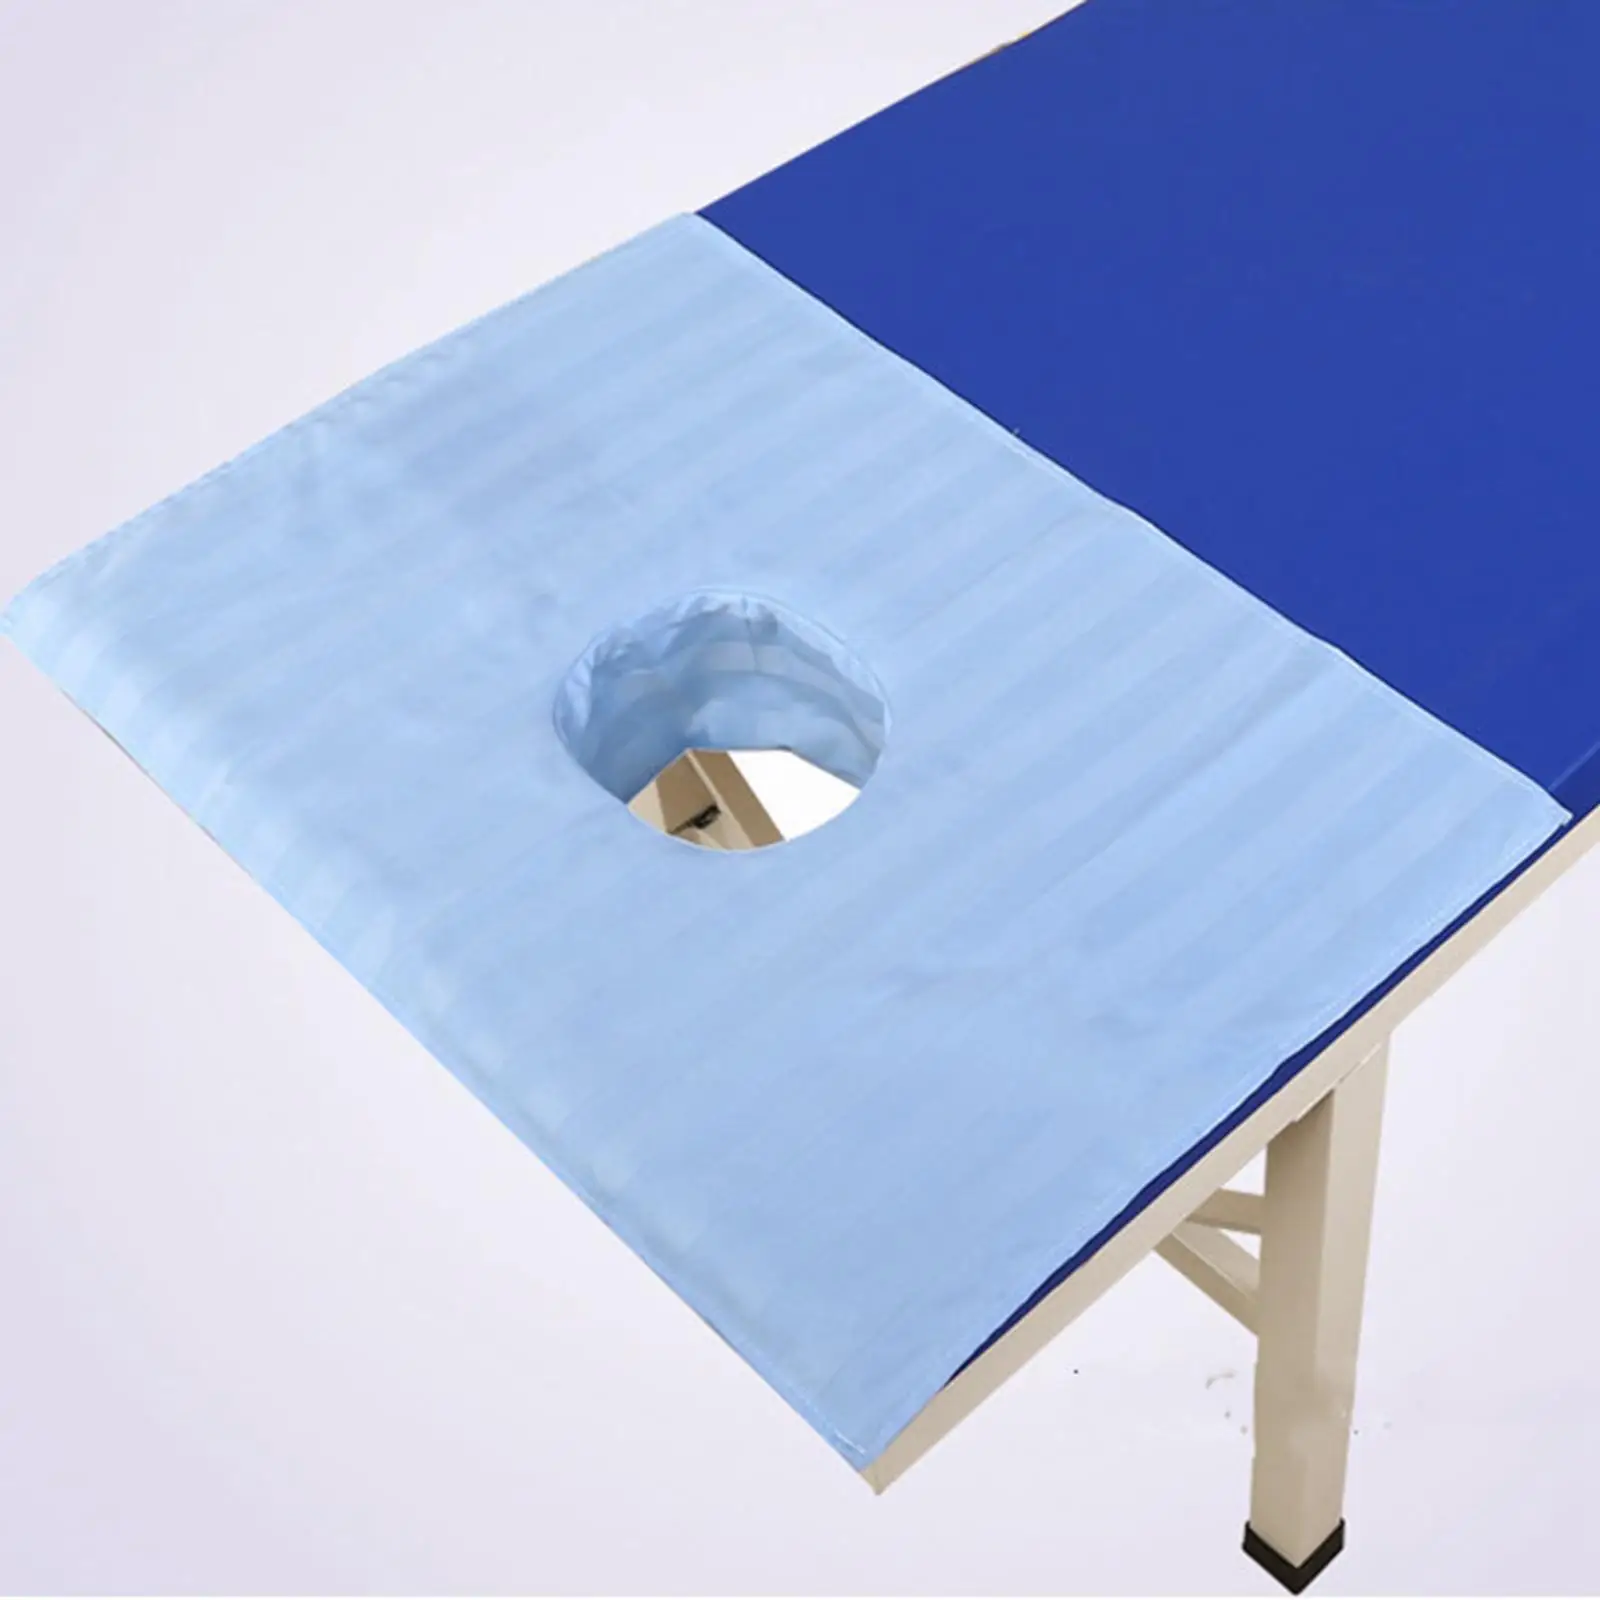 Massage Table Sectional Sheet with Face Hole 60x40cm Massage Bed Coverlet Sectional Towelling Cover for Beauty Salon SPA